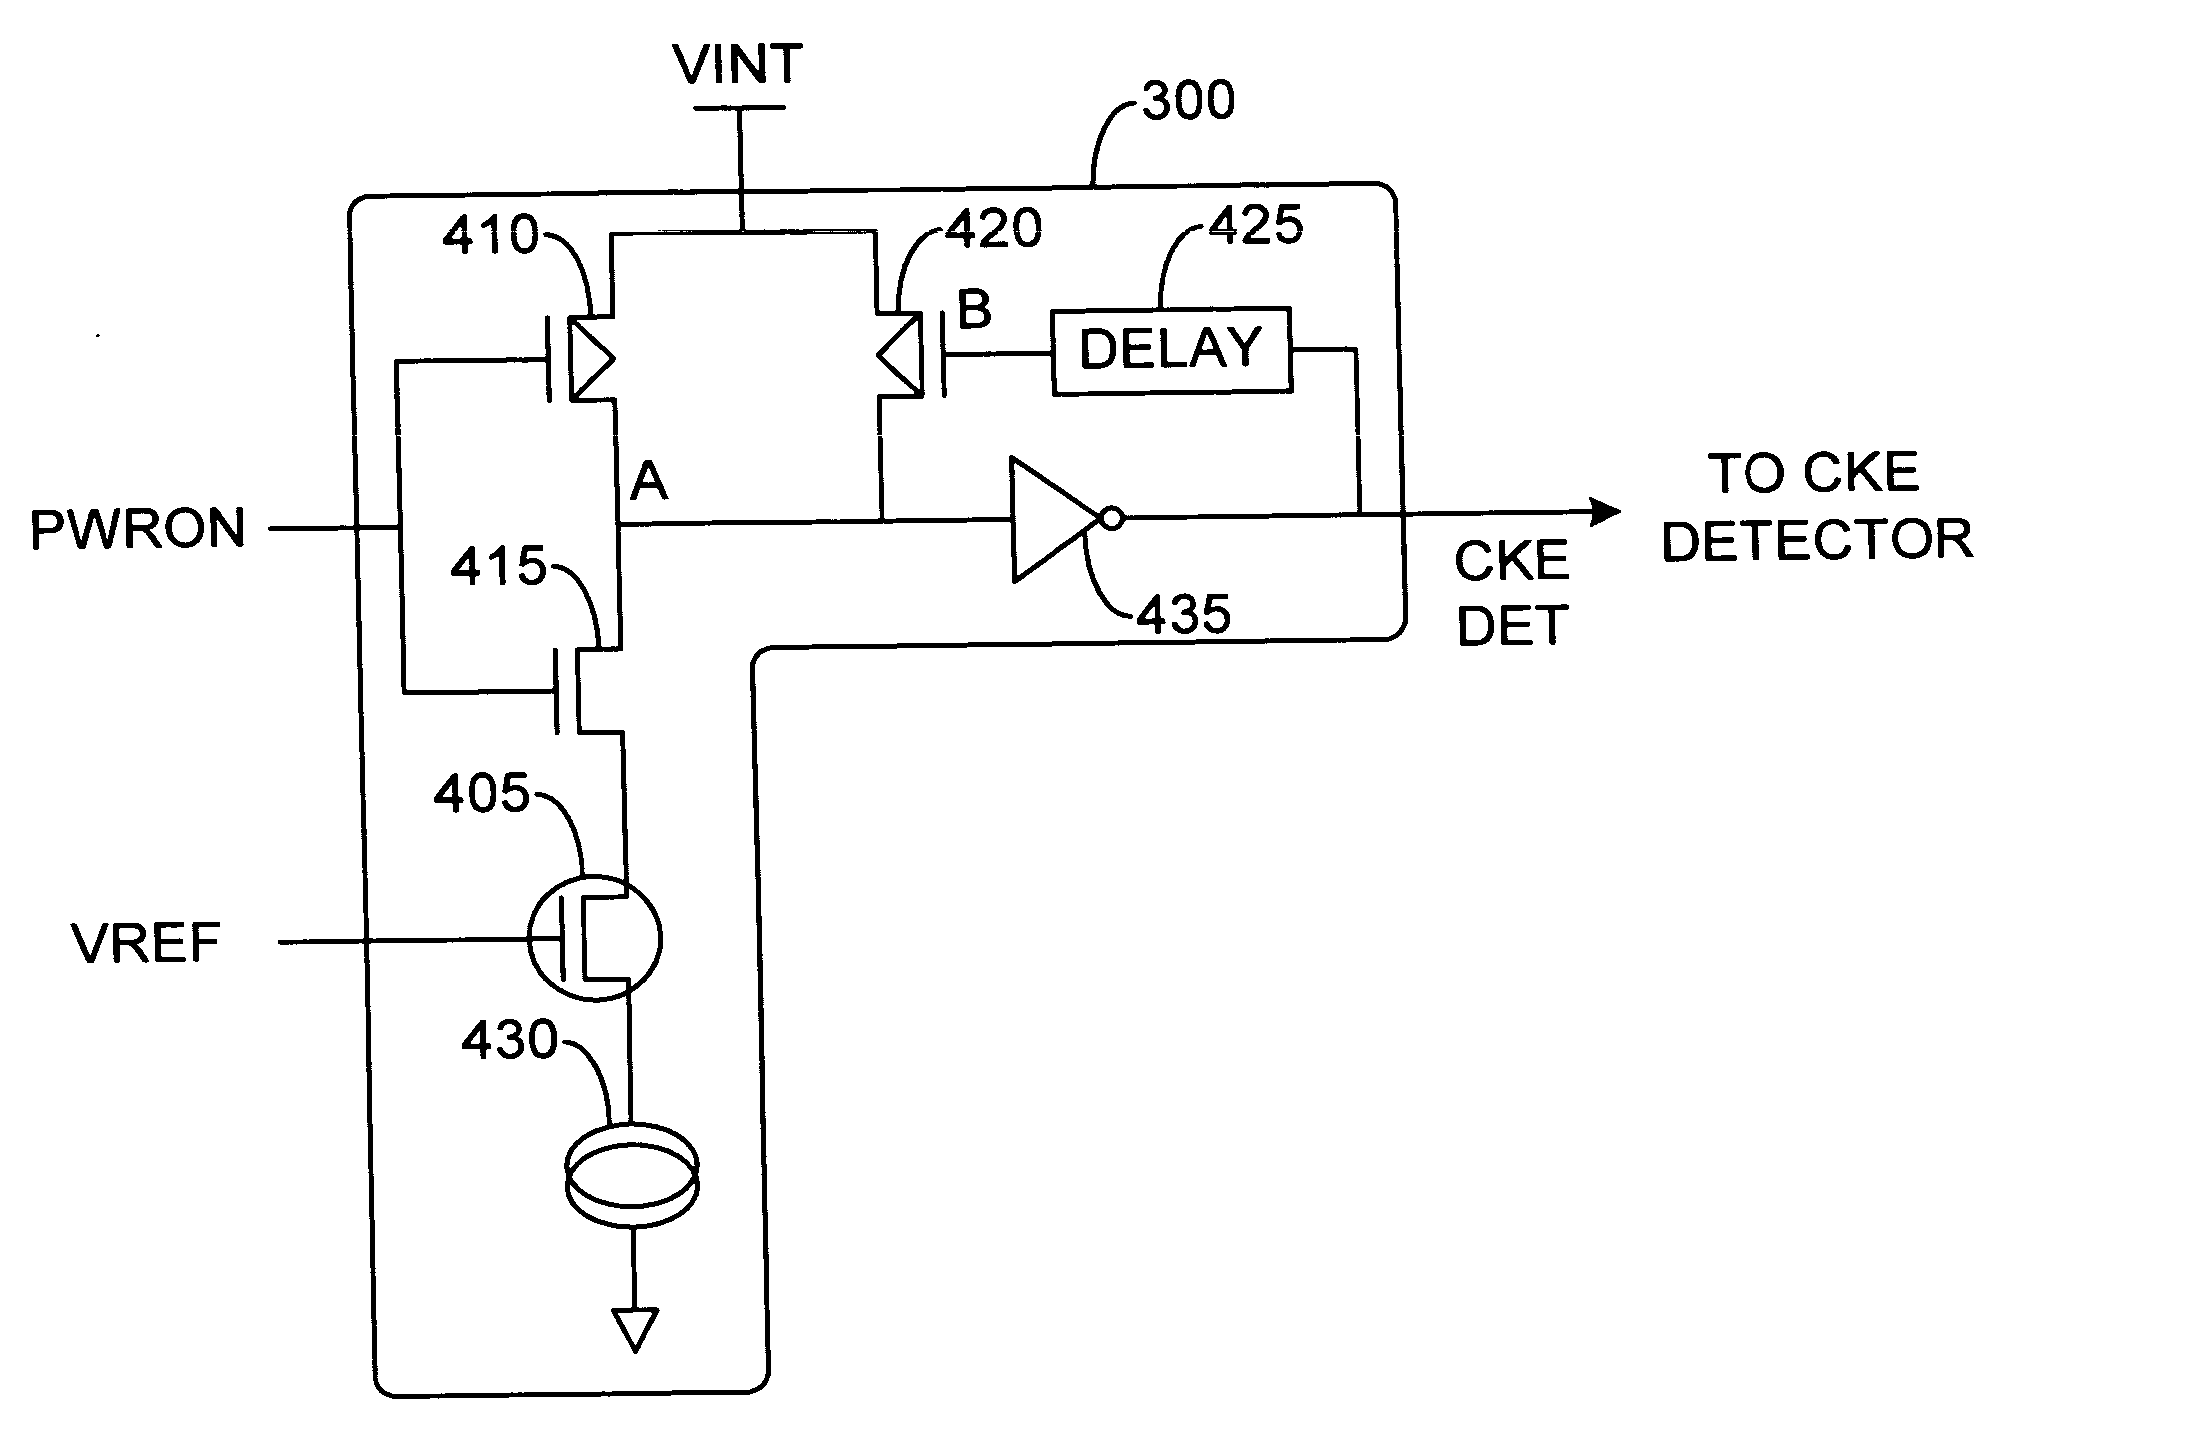 Reference voltage detector for power-on sequence in a memory